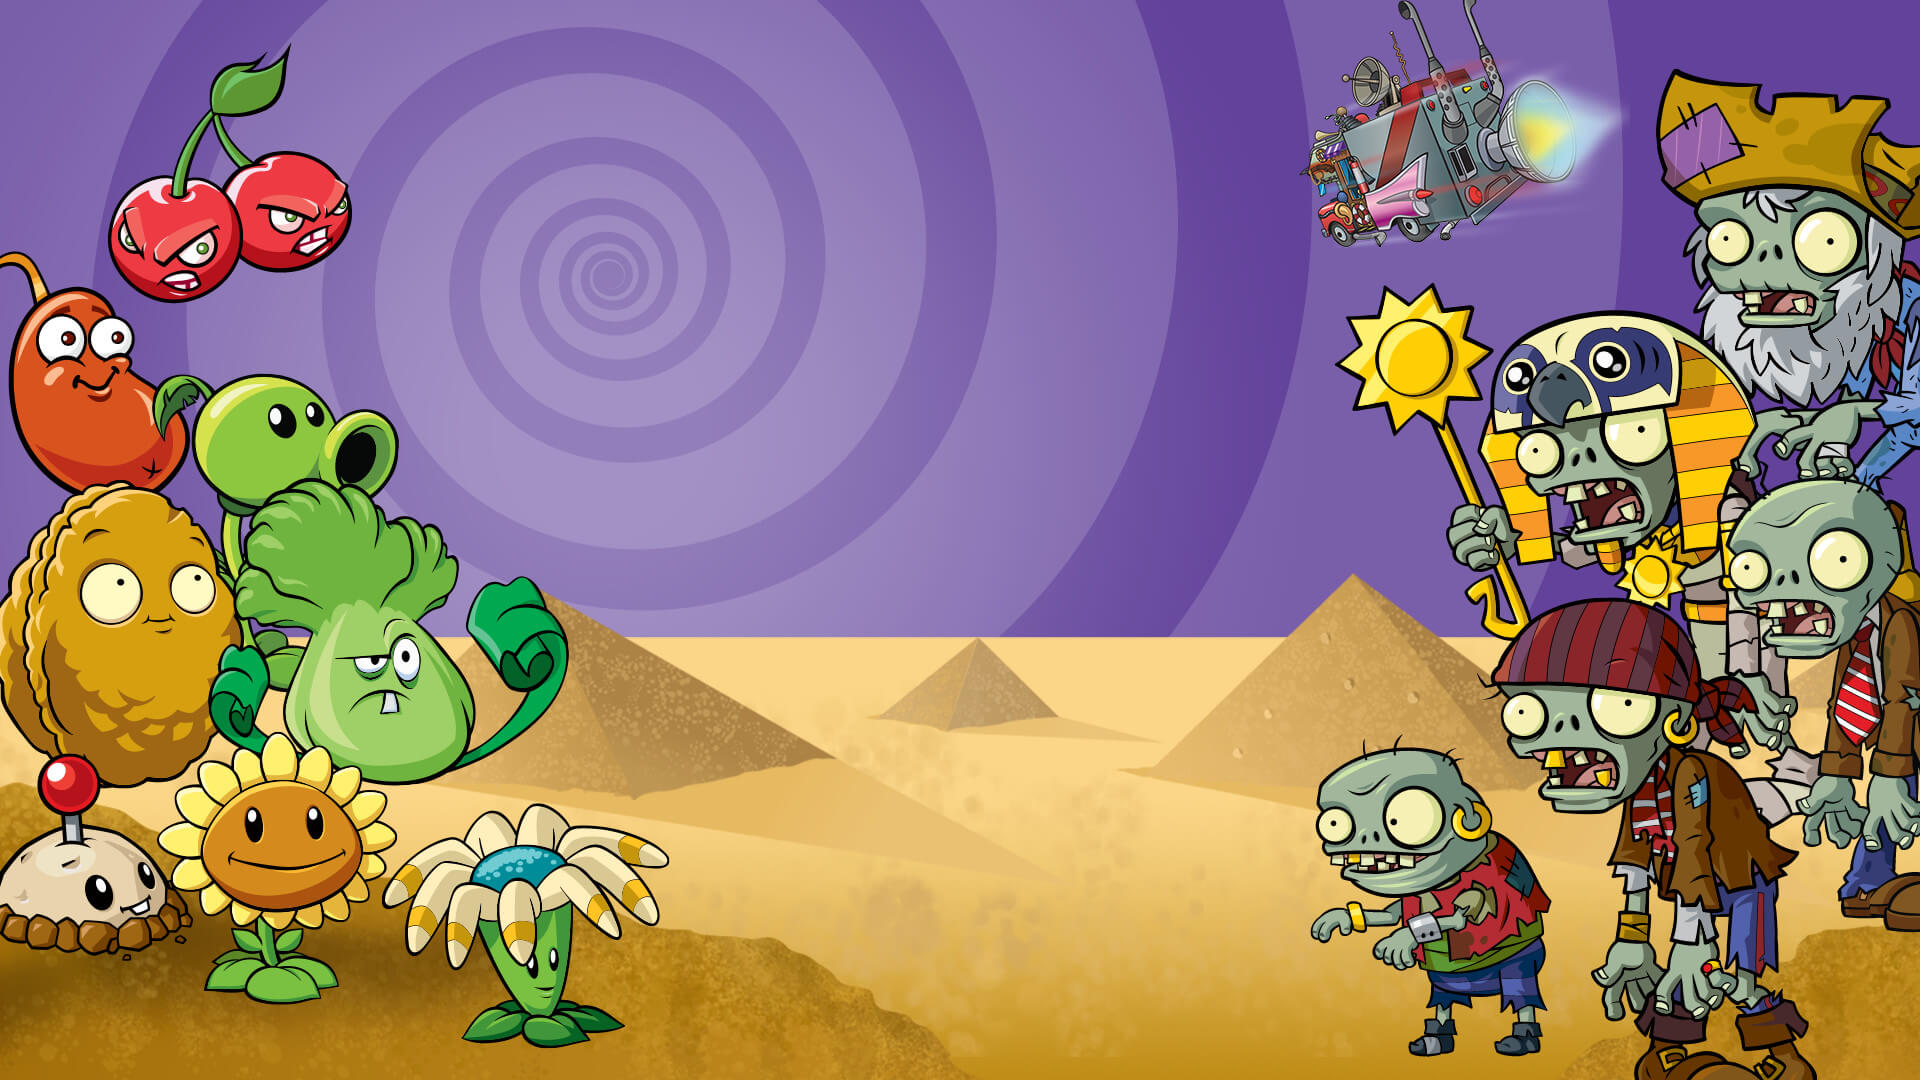 plants vs zombies 2 online free no download full version